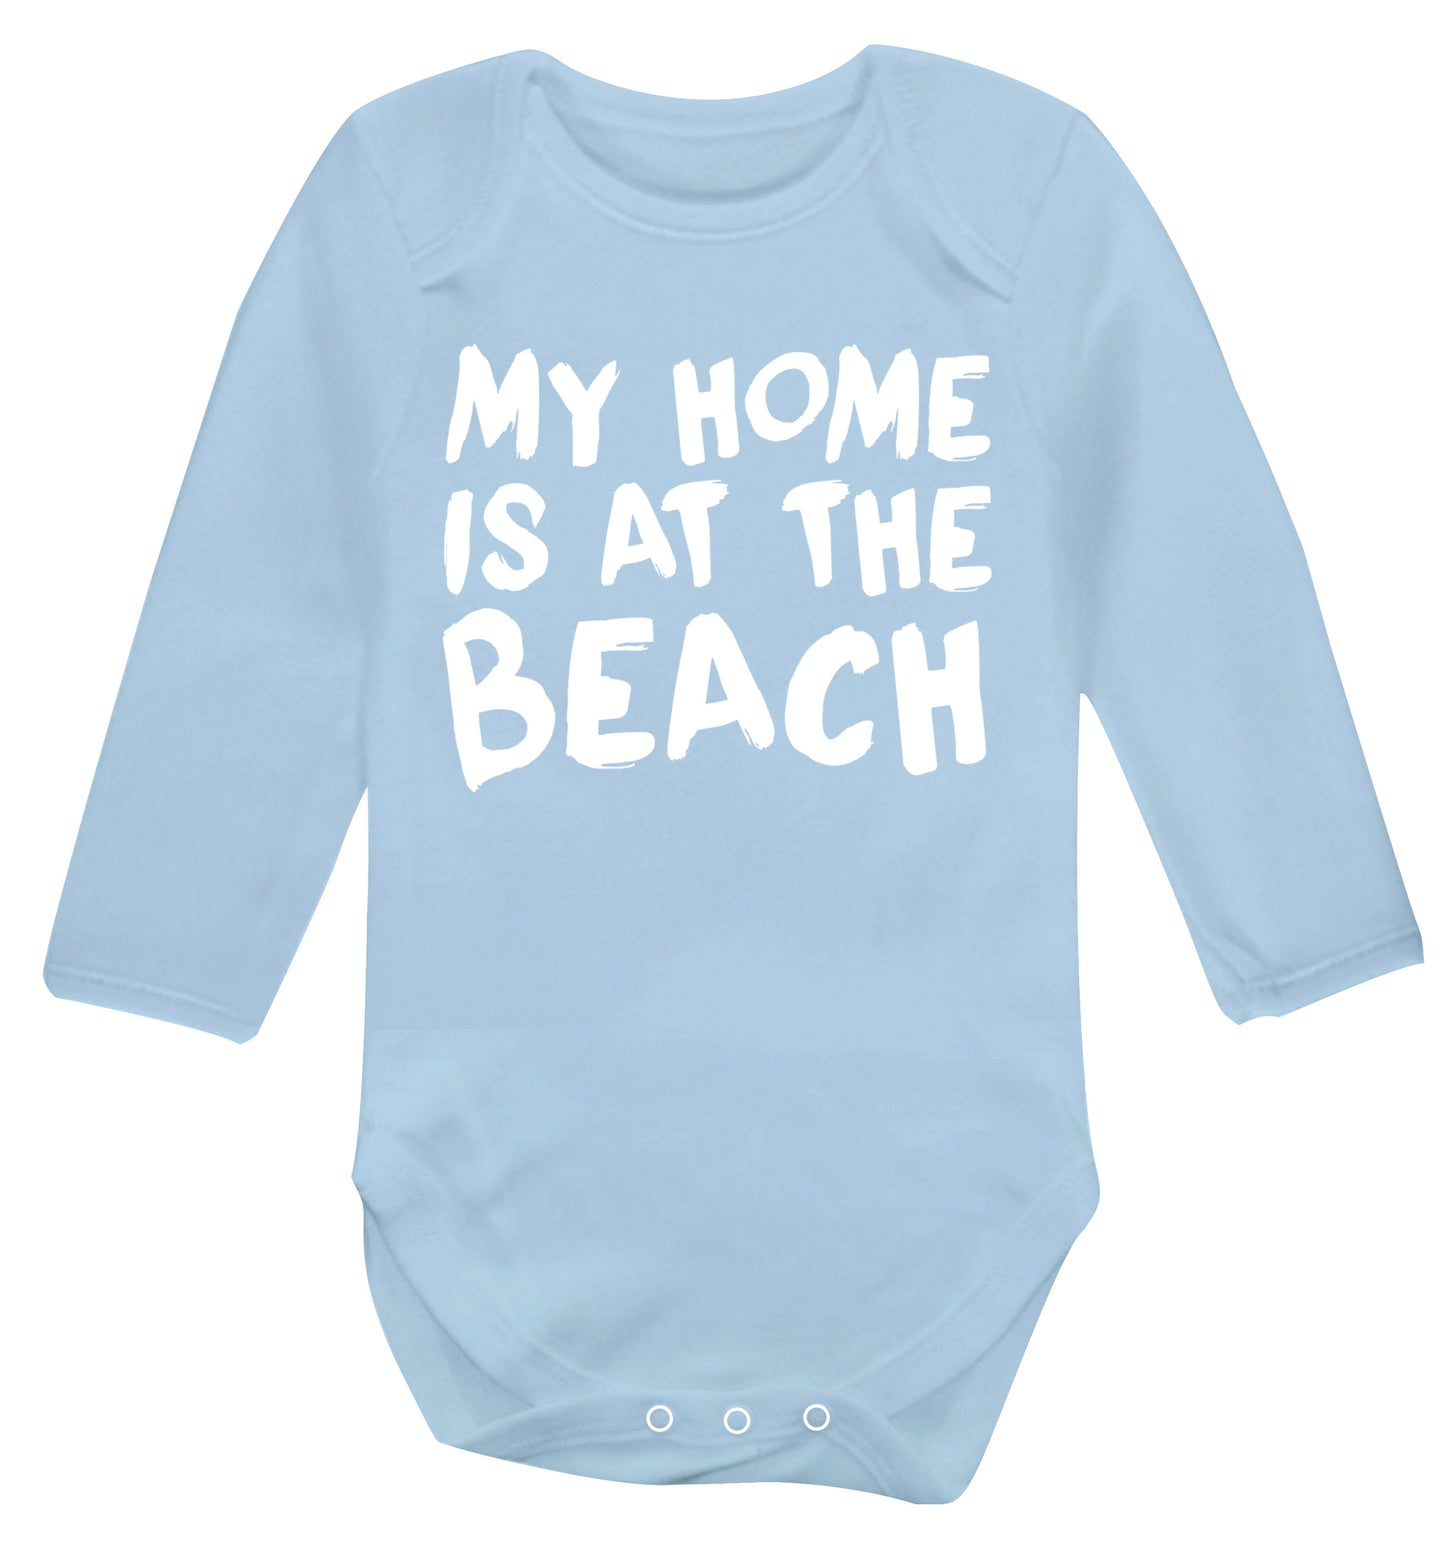 My home is at the beach Baby Vest long sleeved pale blue 6-12 months